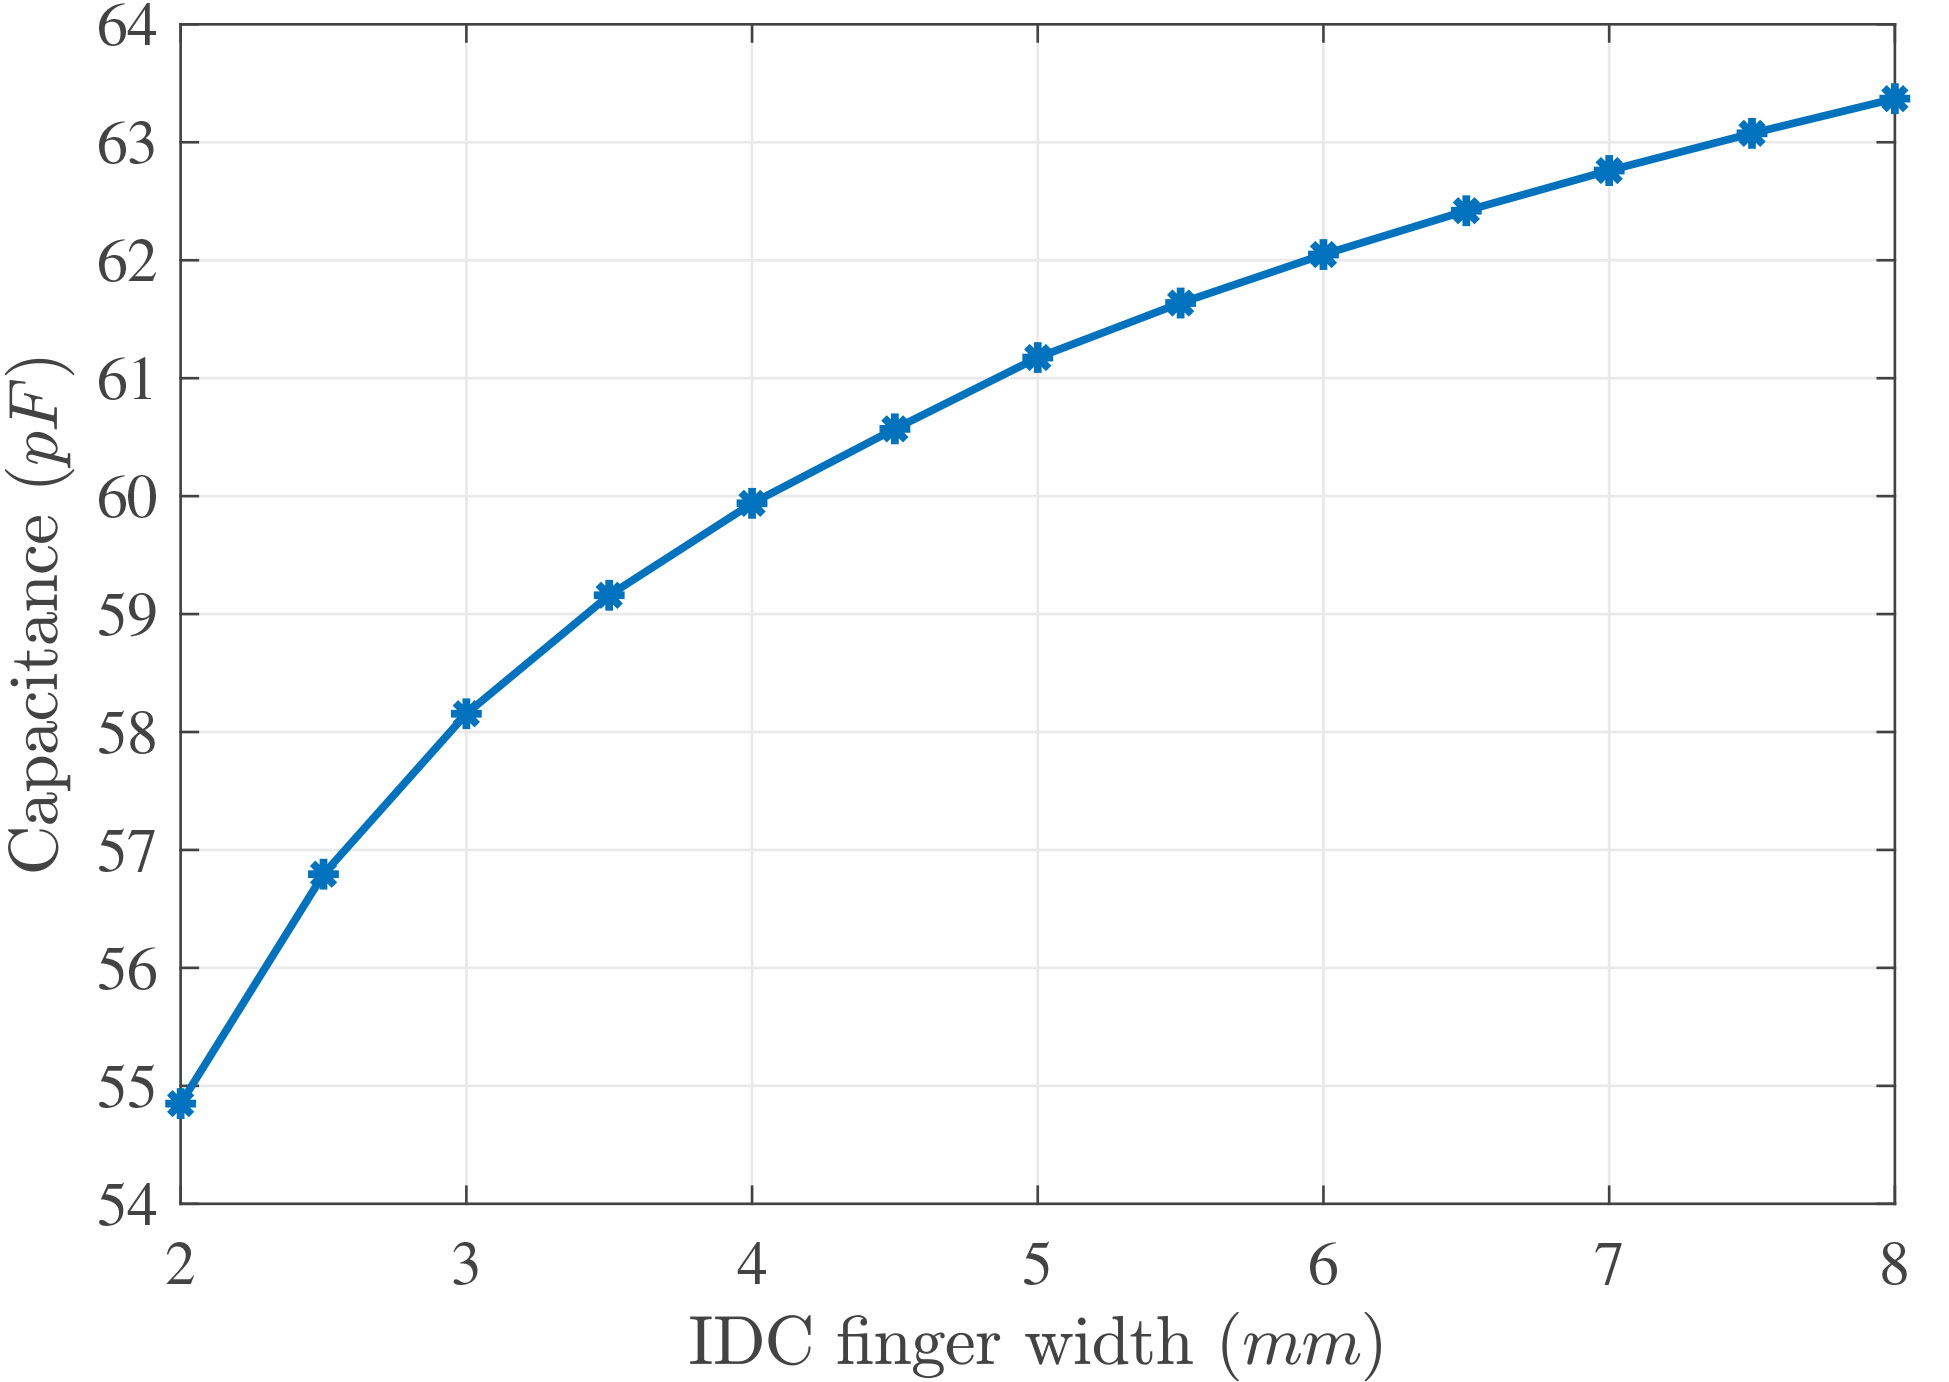 Capacitance over different IDC finger a) widths, b) spacings